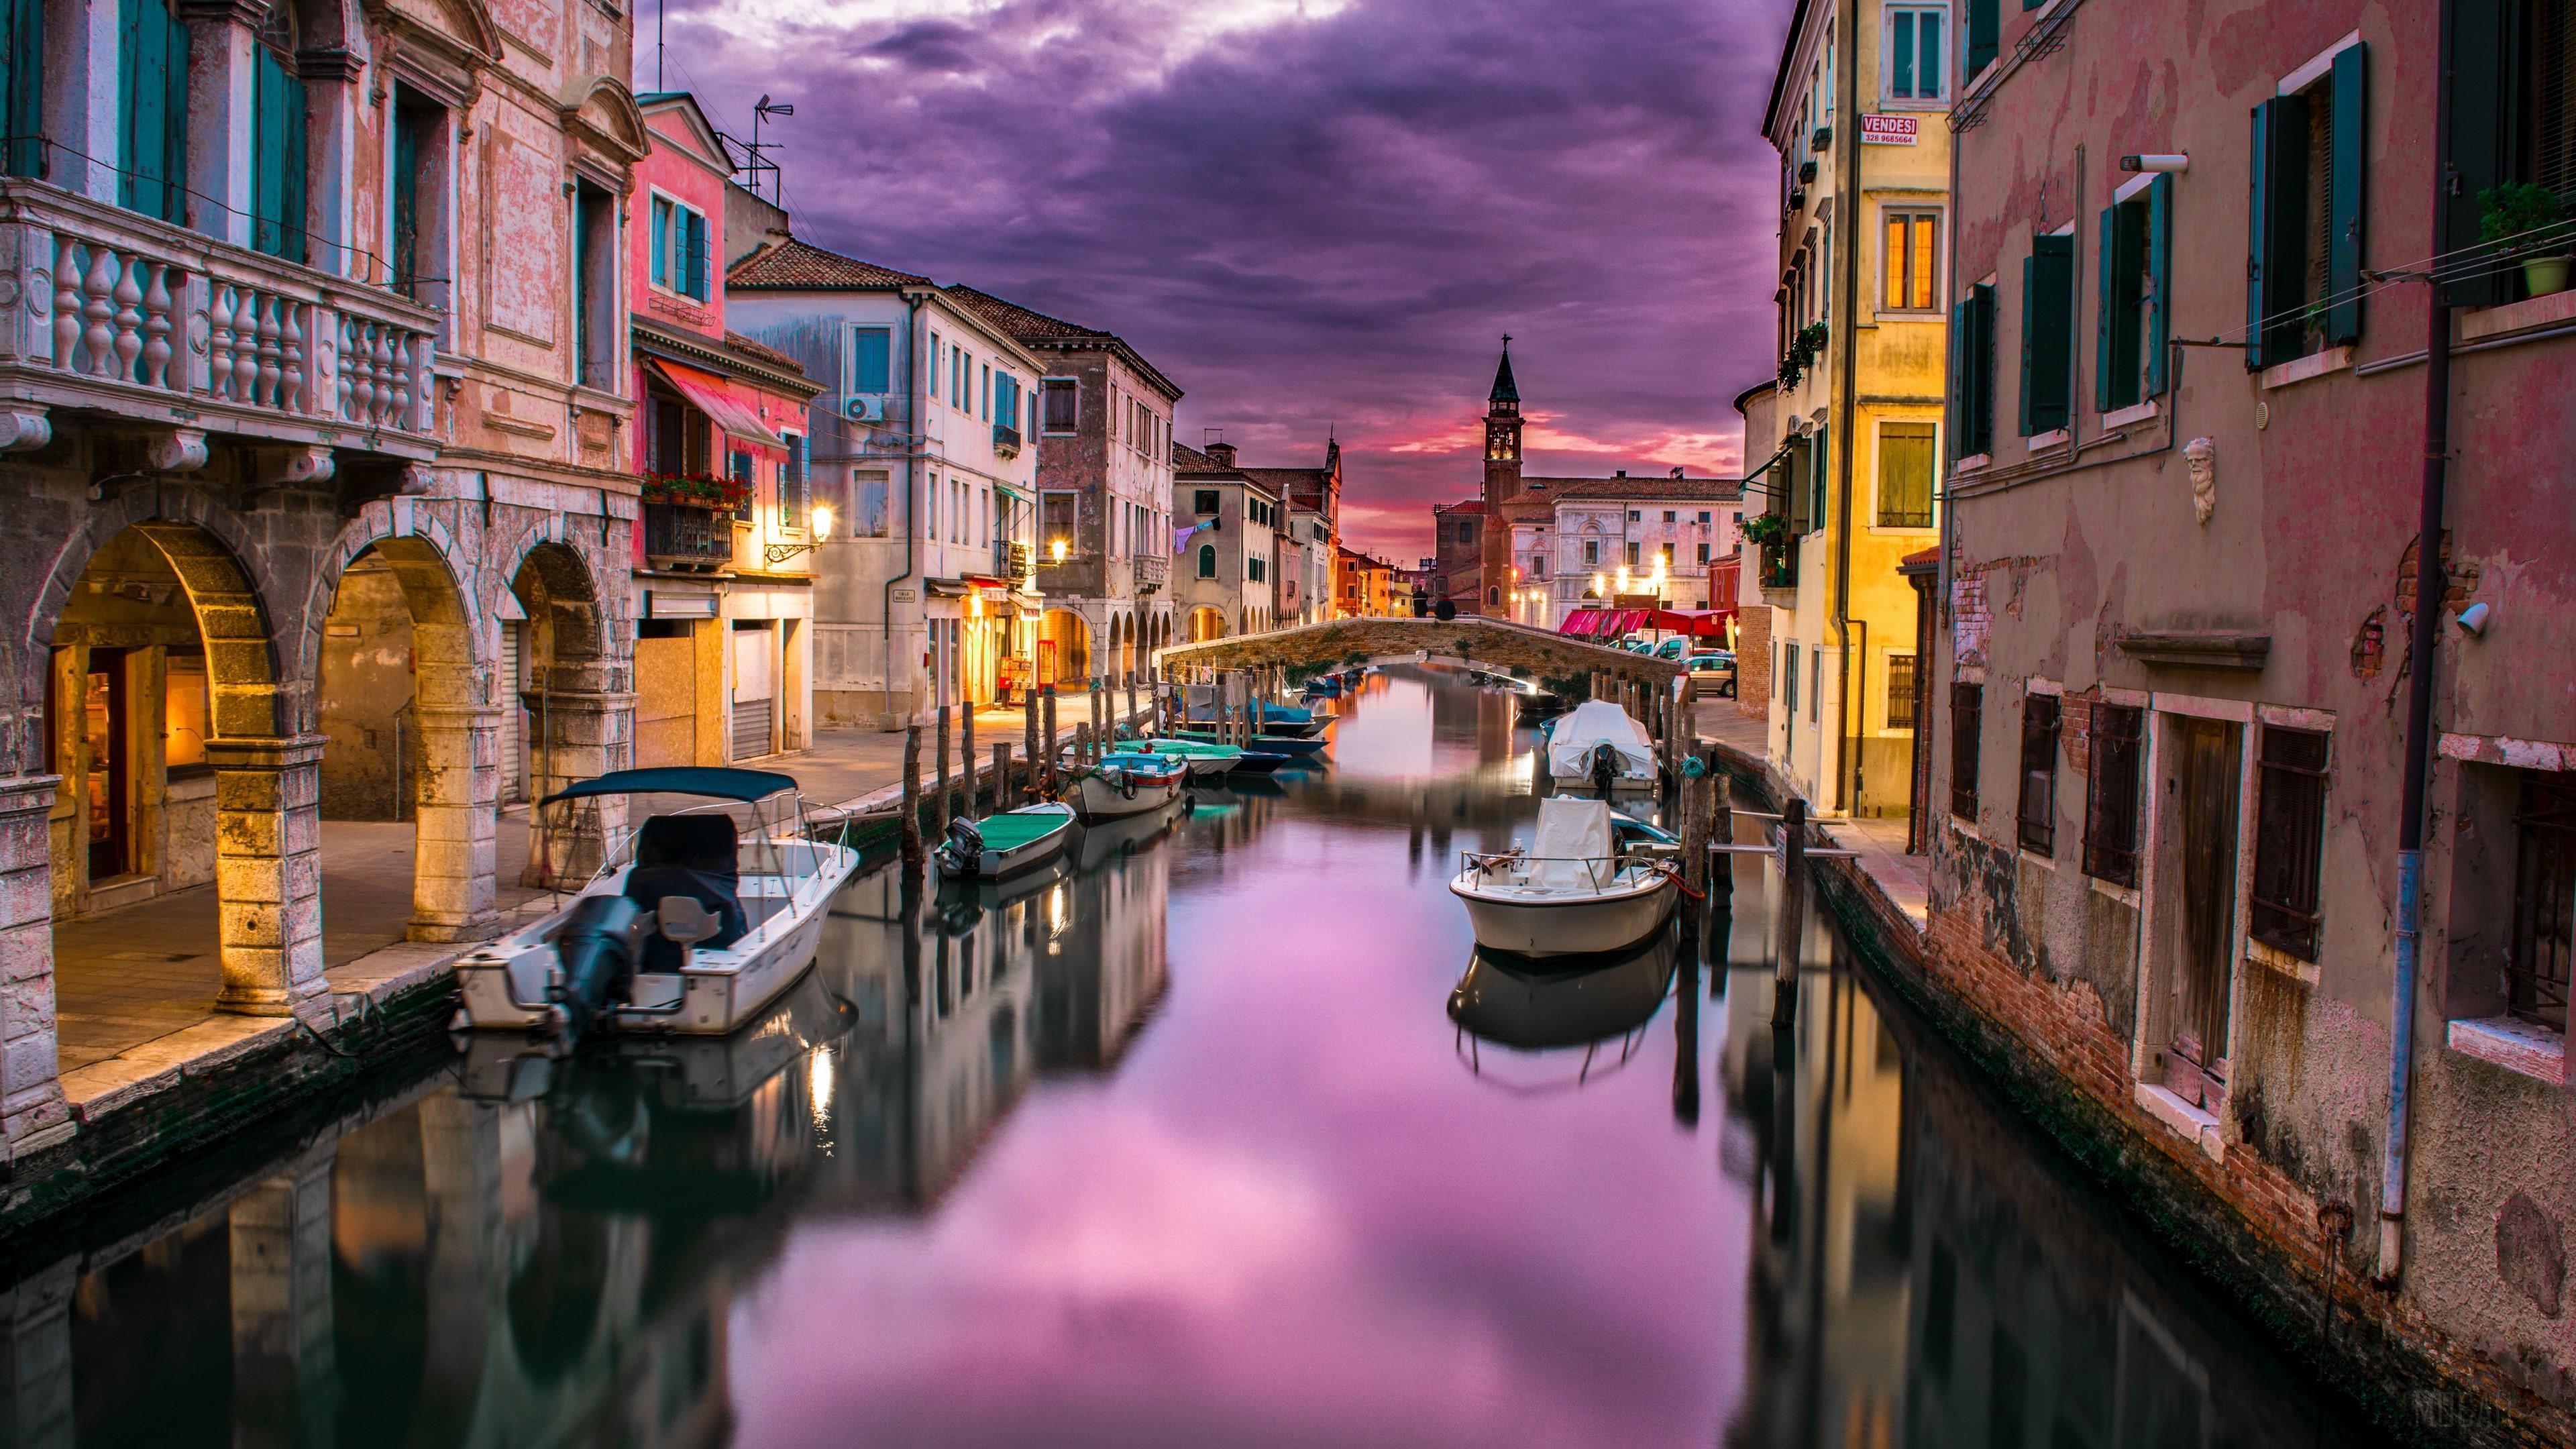 HD wallpaper, House, Venice 4K, Canal, Boat, Sunset, Reflection, Chioggia